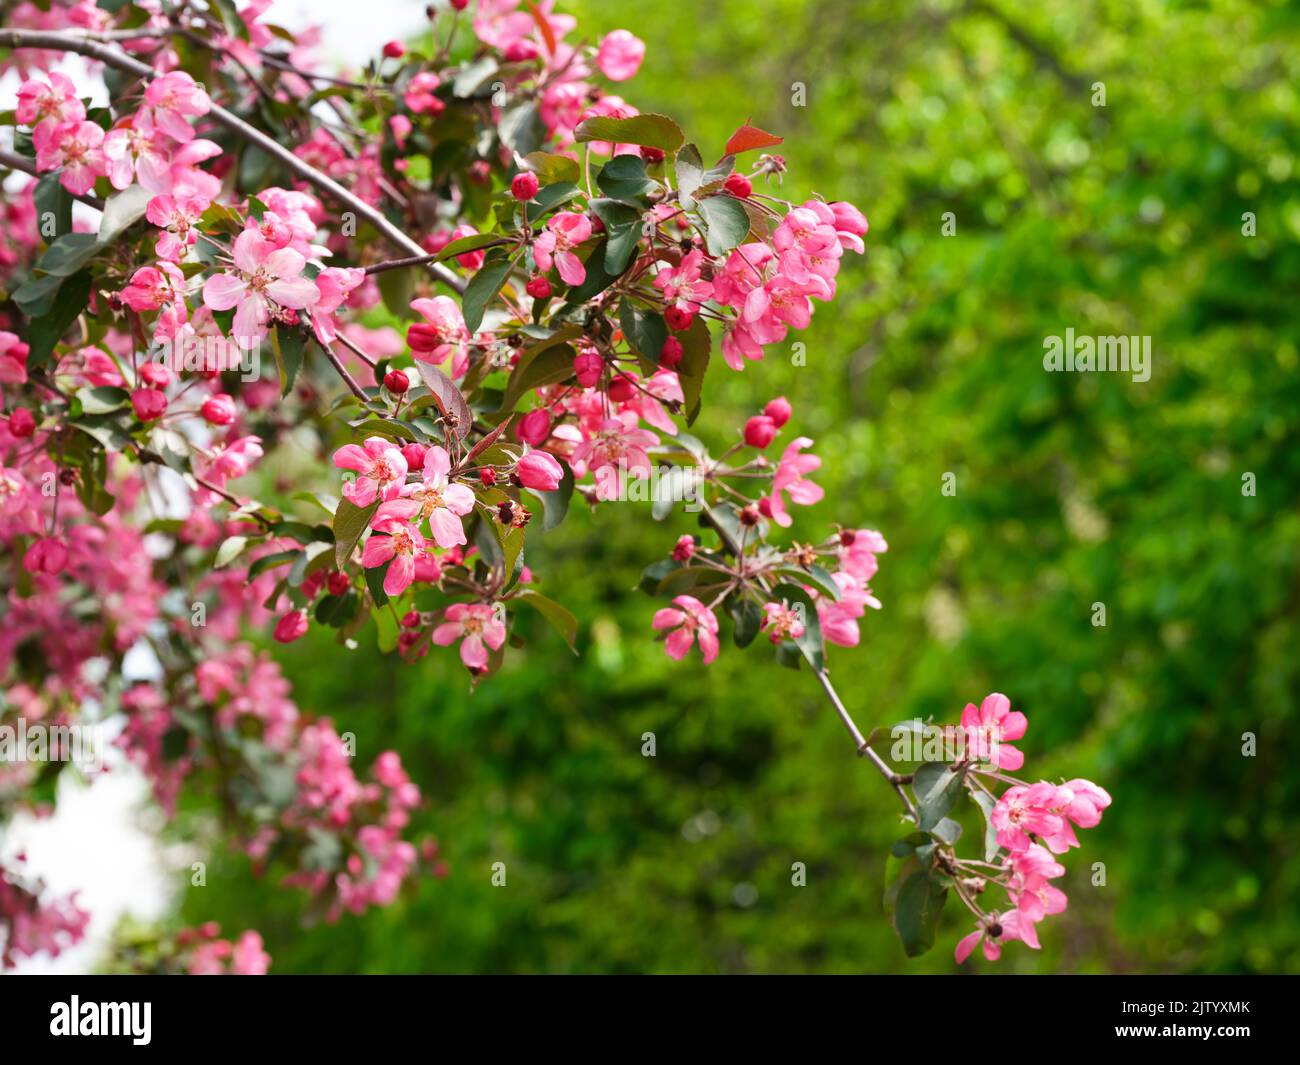 Pink flowers on apple tree branches blooming in orchard Stock Photo